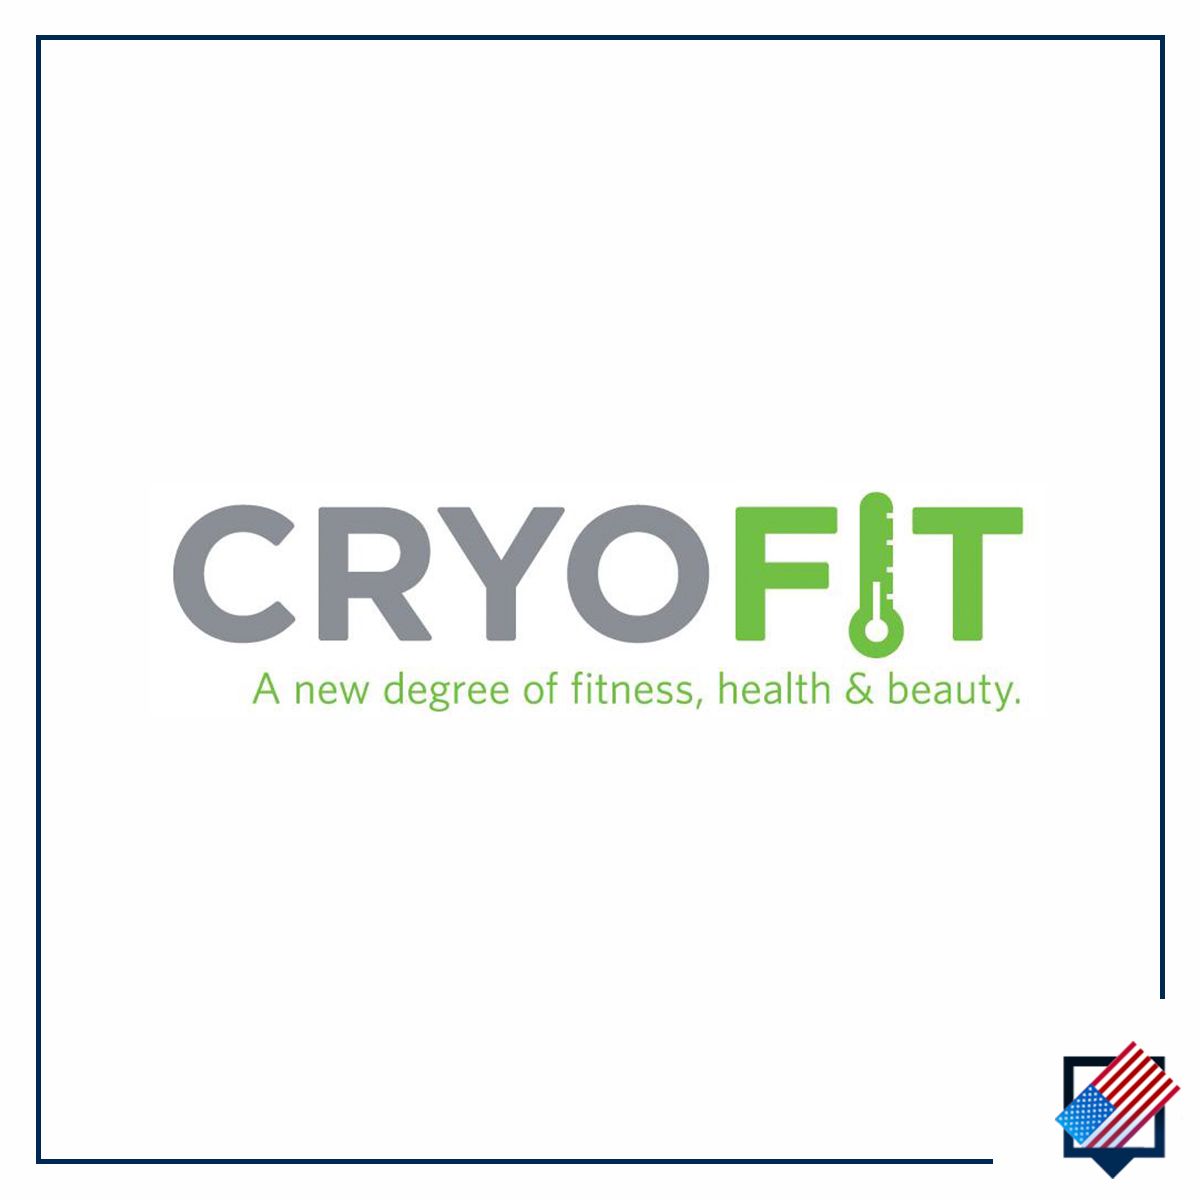 CryoFit A new degree of fitness, health & beauty.